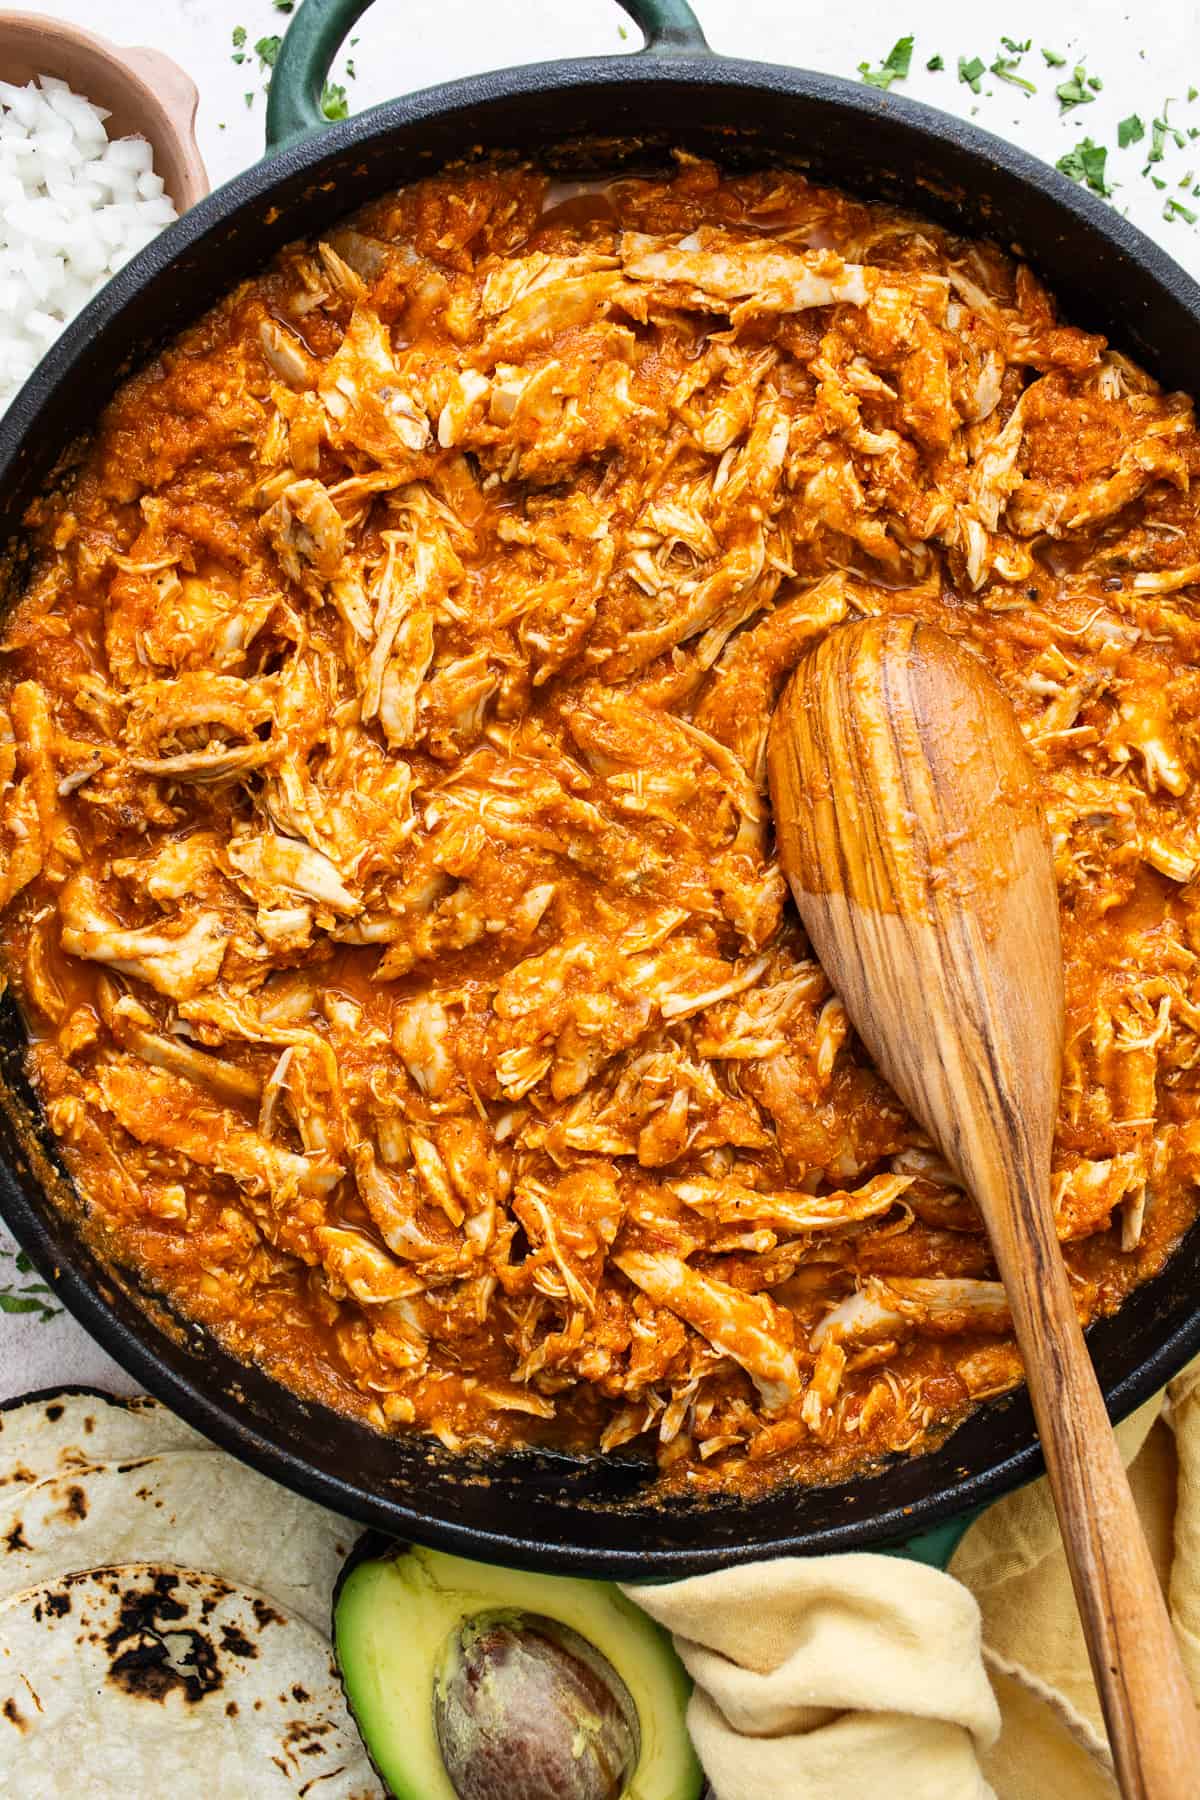 Chicken Tinga is a classic Mexican dish that combines tender chicken with a smoky tomato sauce made with chipotles in abodo. It's great for serving in tacos, tostadas, burritos, sopes, enchiladas, and more!